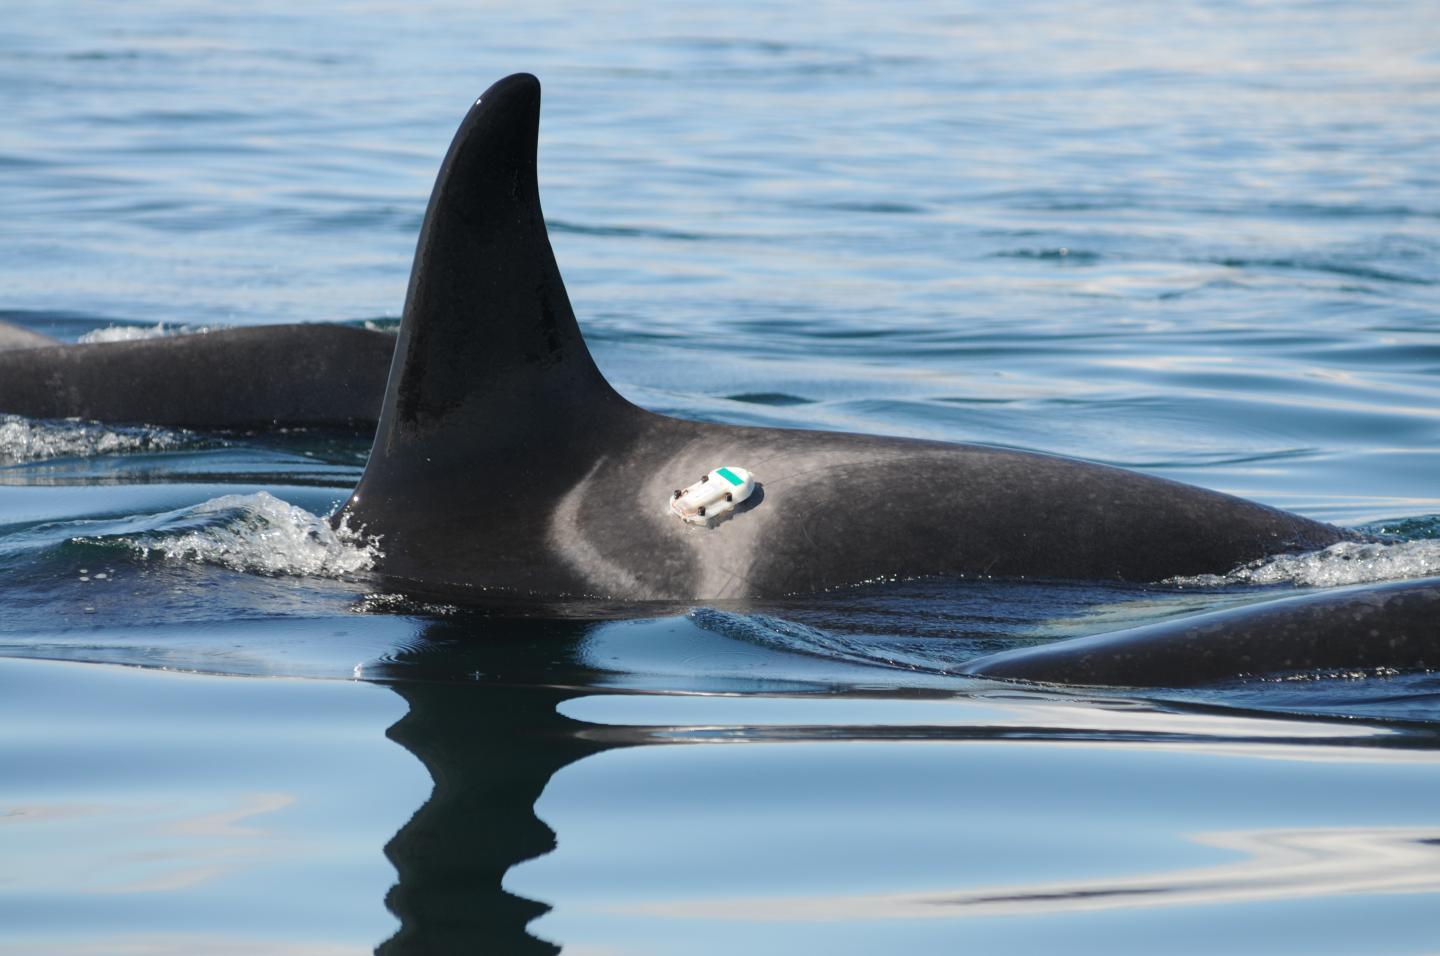 Acoustic Tags on Orca Whales